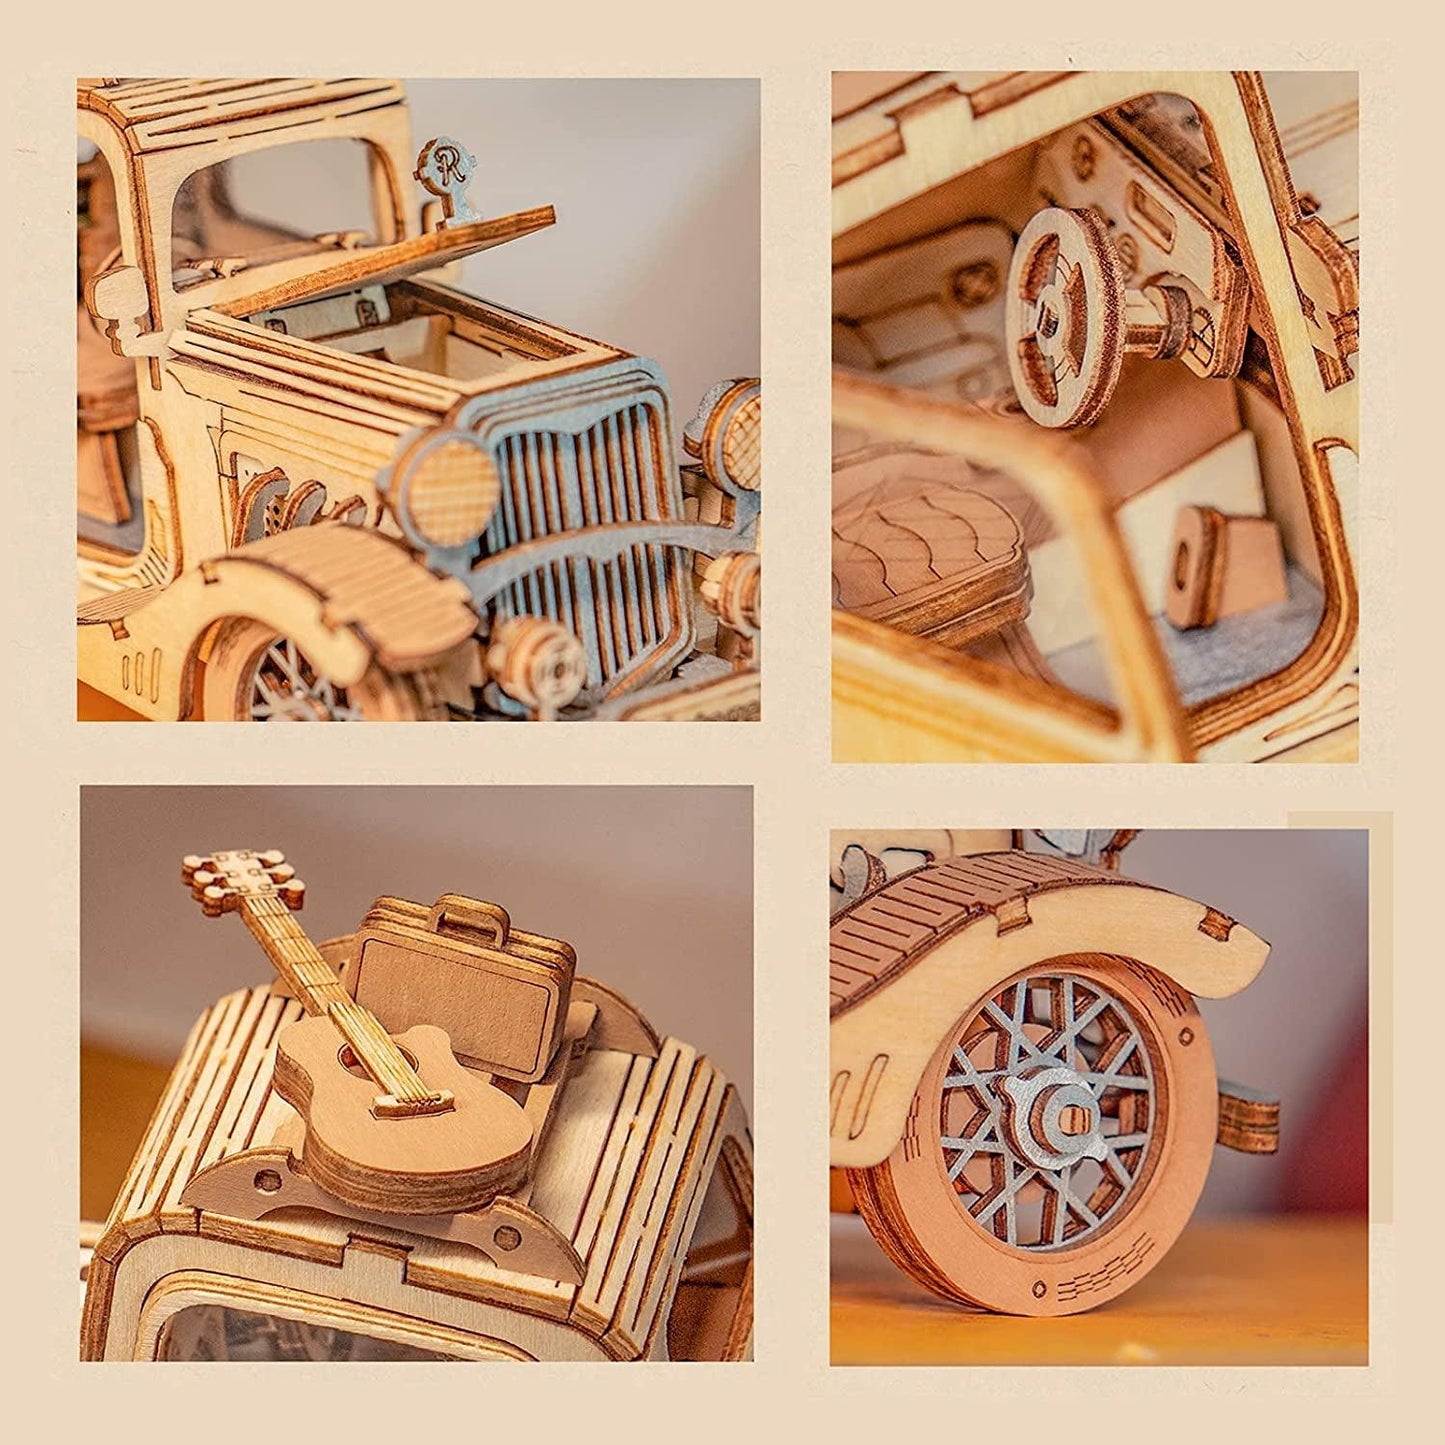 3D Wooden Puzzles Retro Car Model - Collectibles Wooden Model Kits for Adults Desk Toys - WoodArtSupply